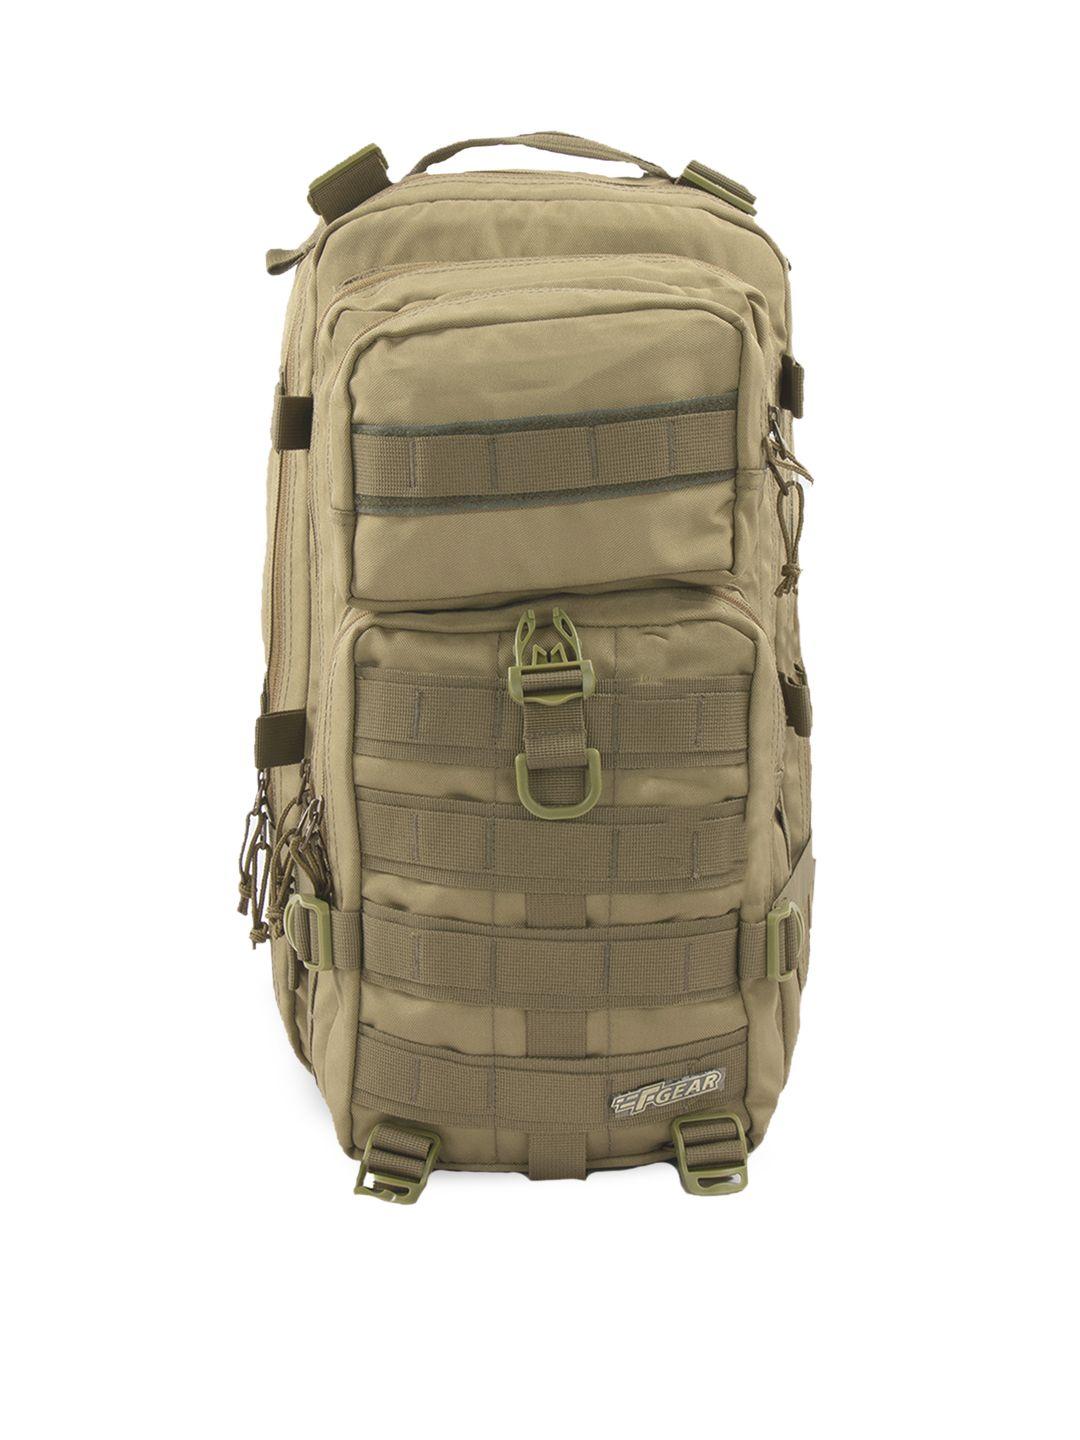 f-gear-unisex-khaki-green-military-tactical-solid-backpack